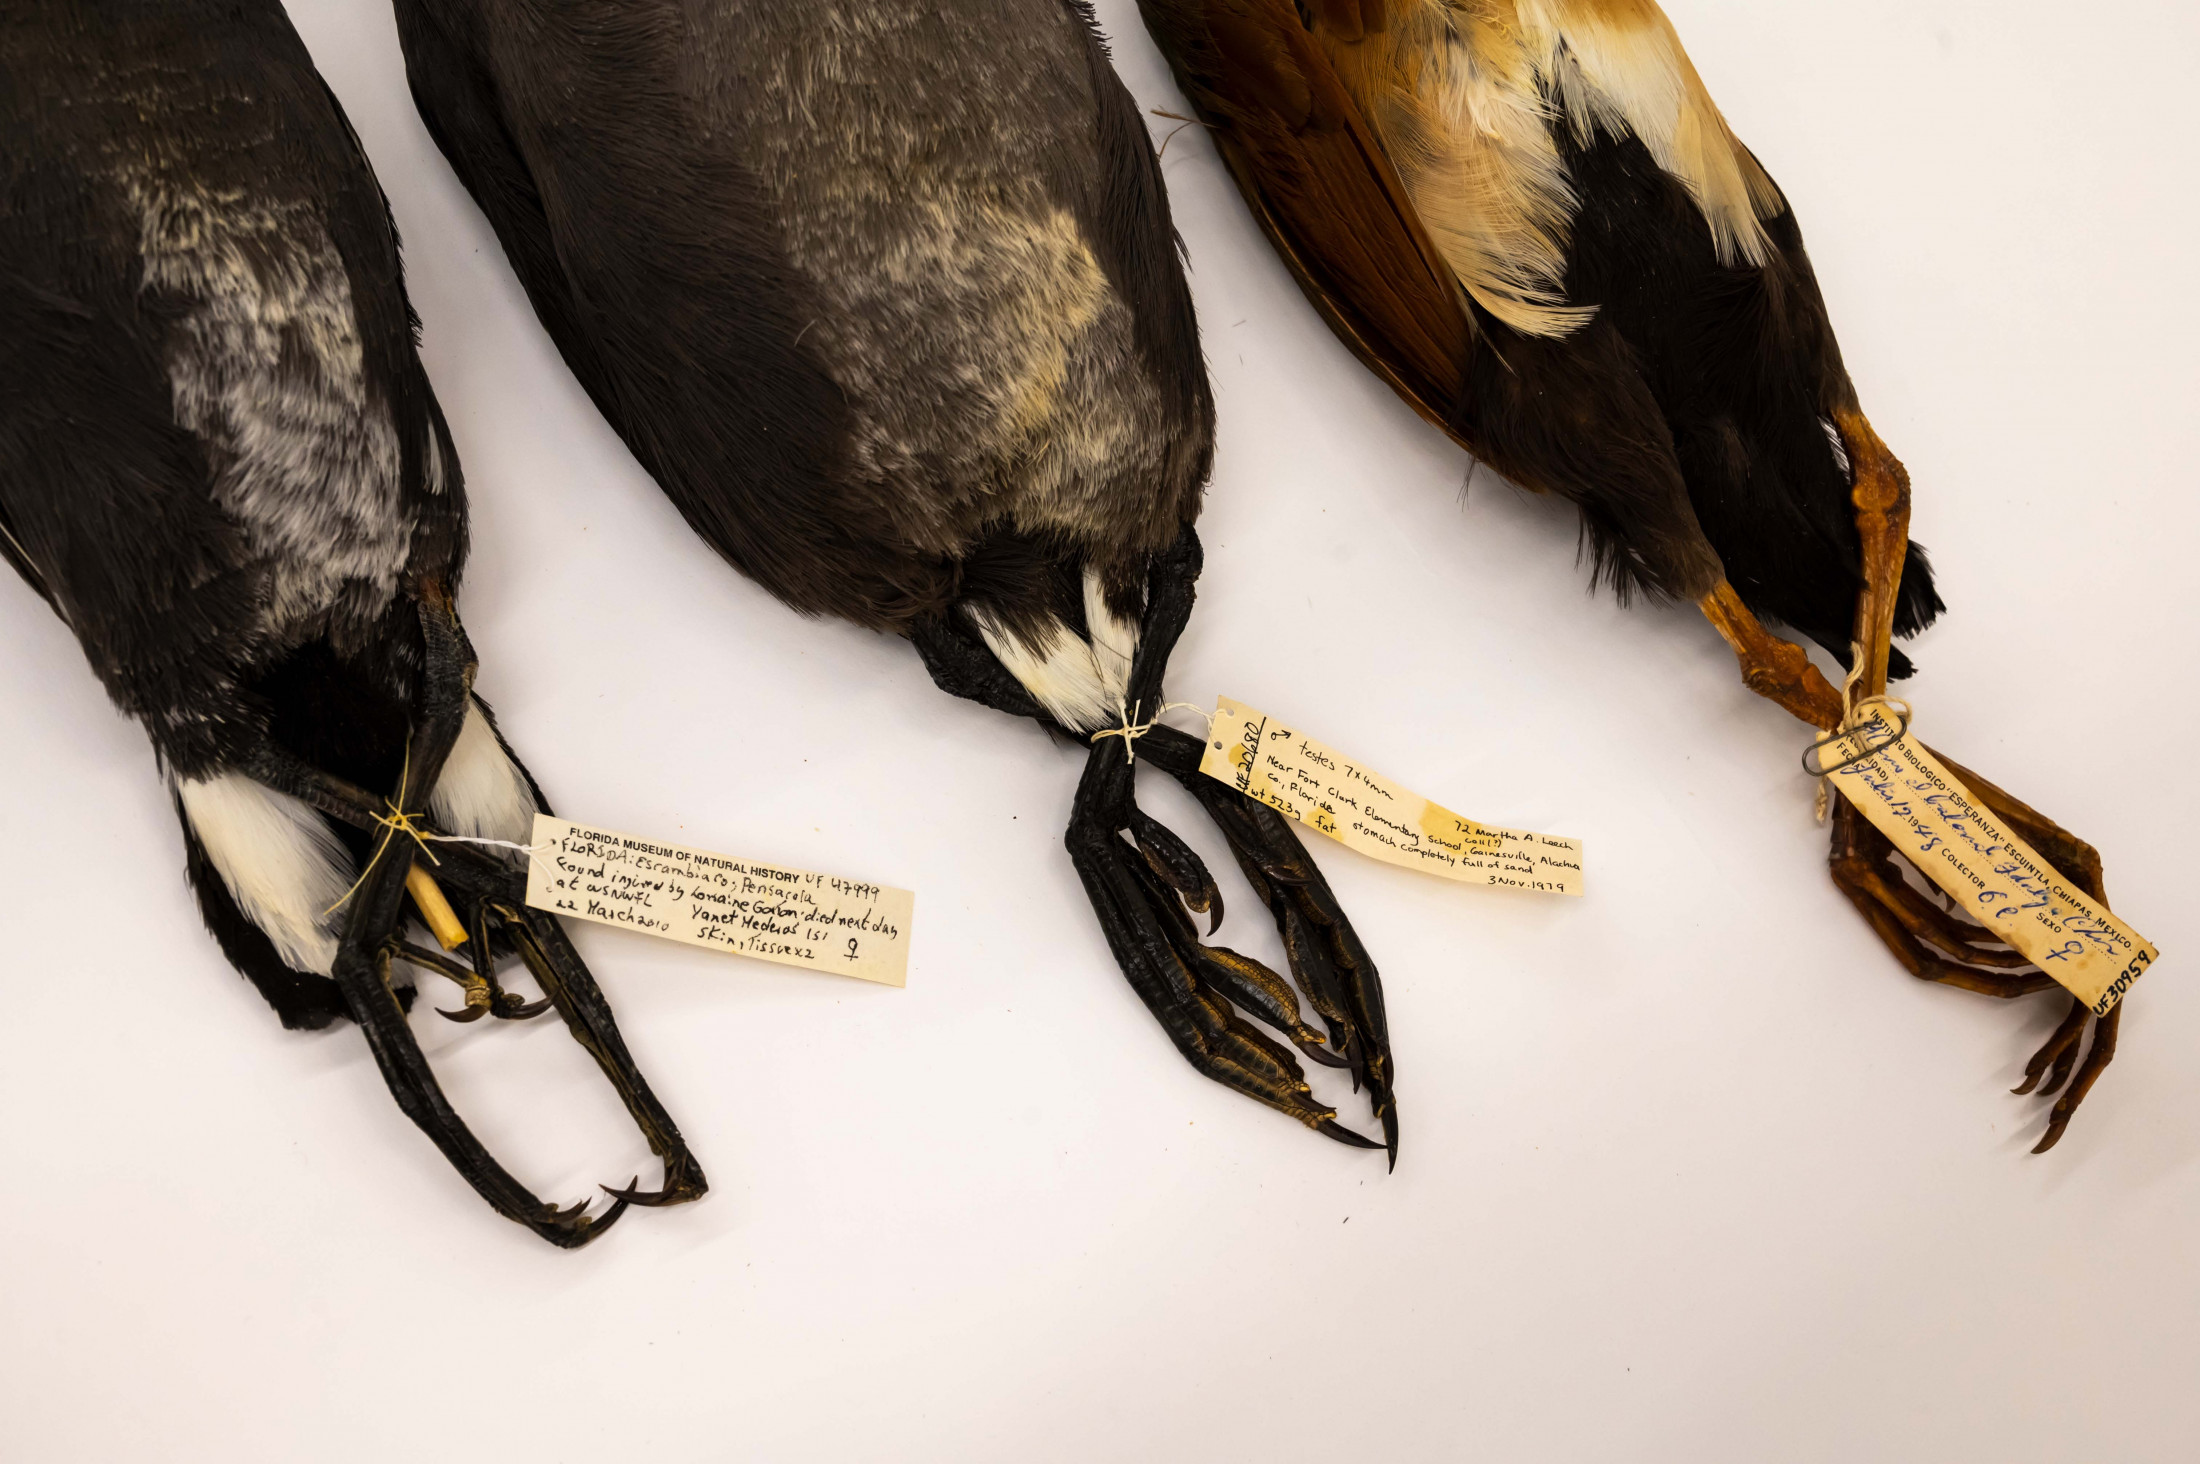 Photo of the lower half of three museum bird specimens, with their feet tied together and specimen labels attached. 